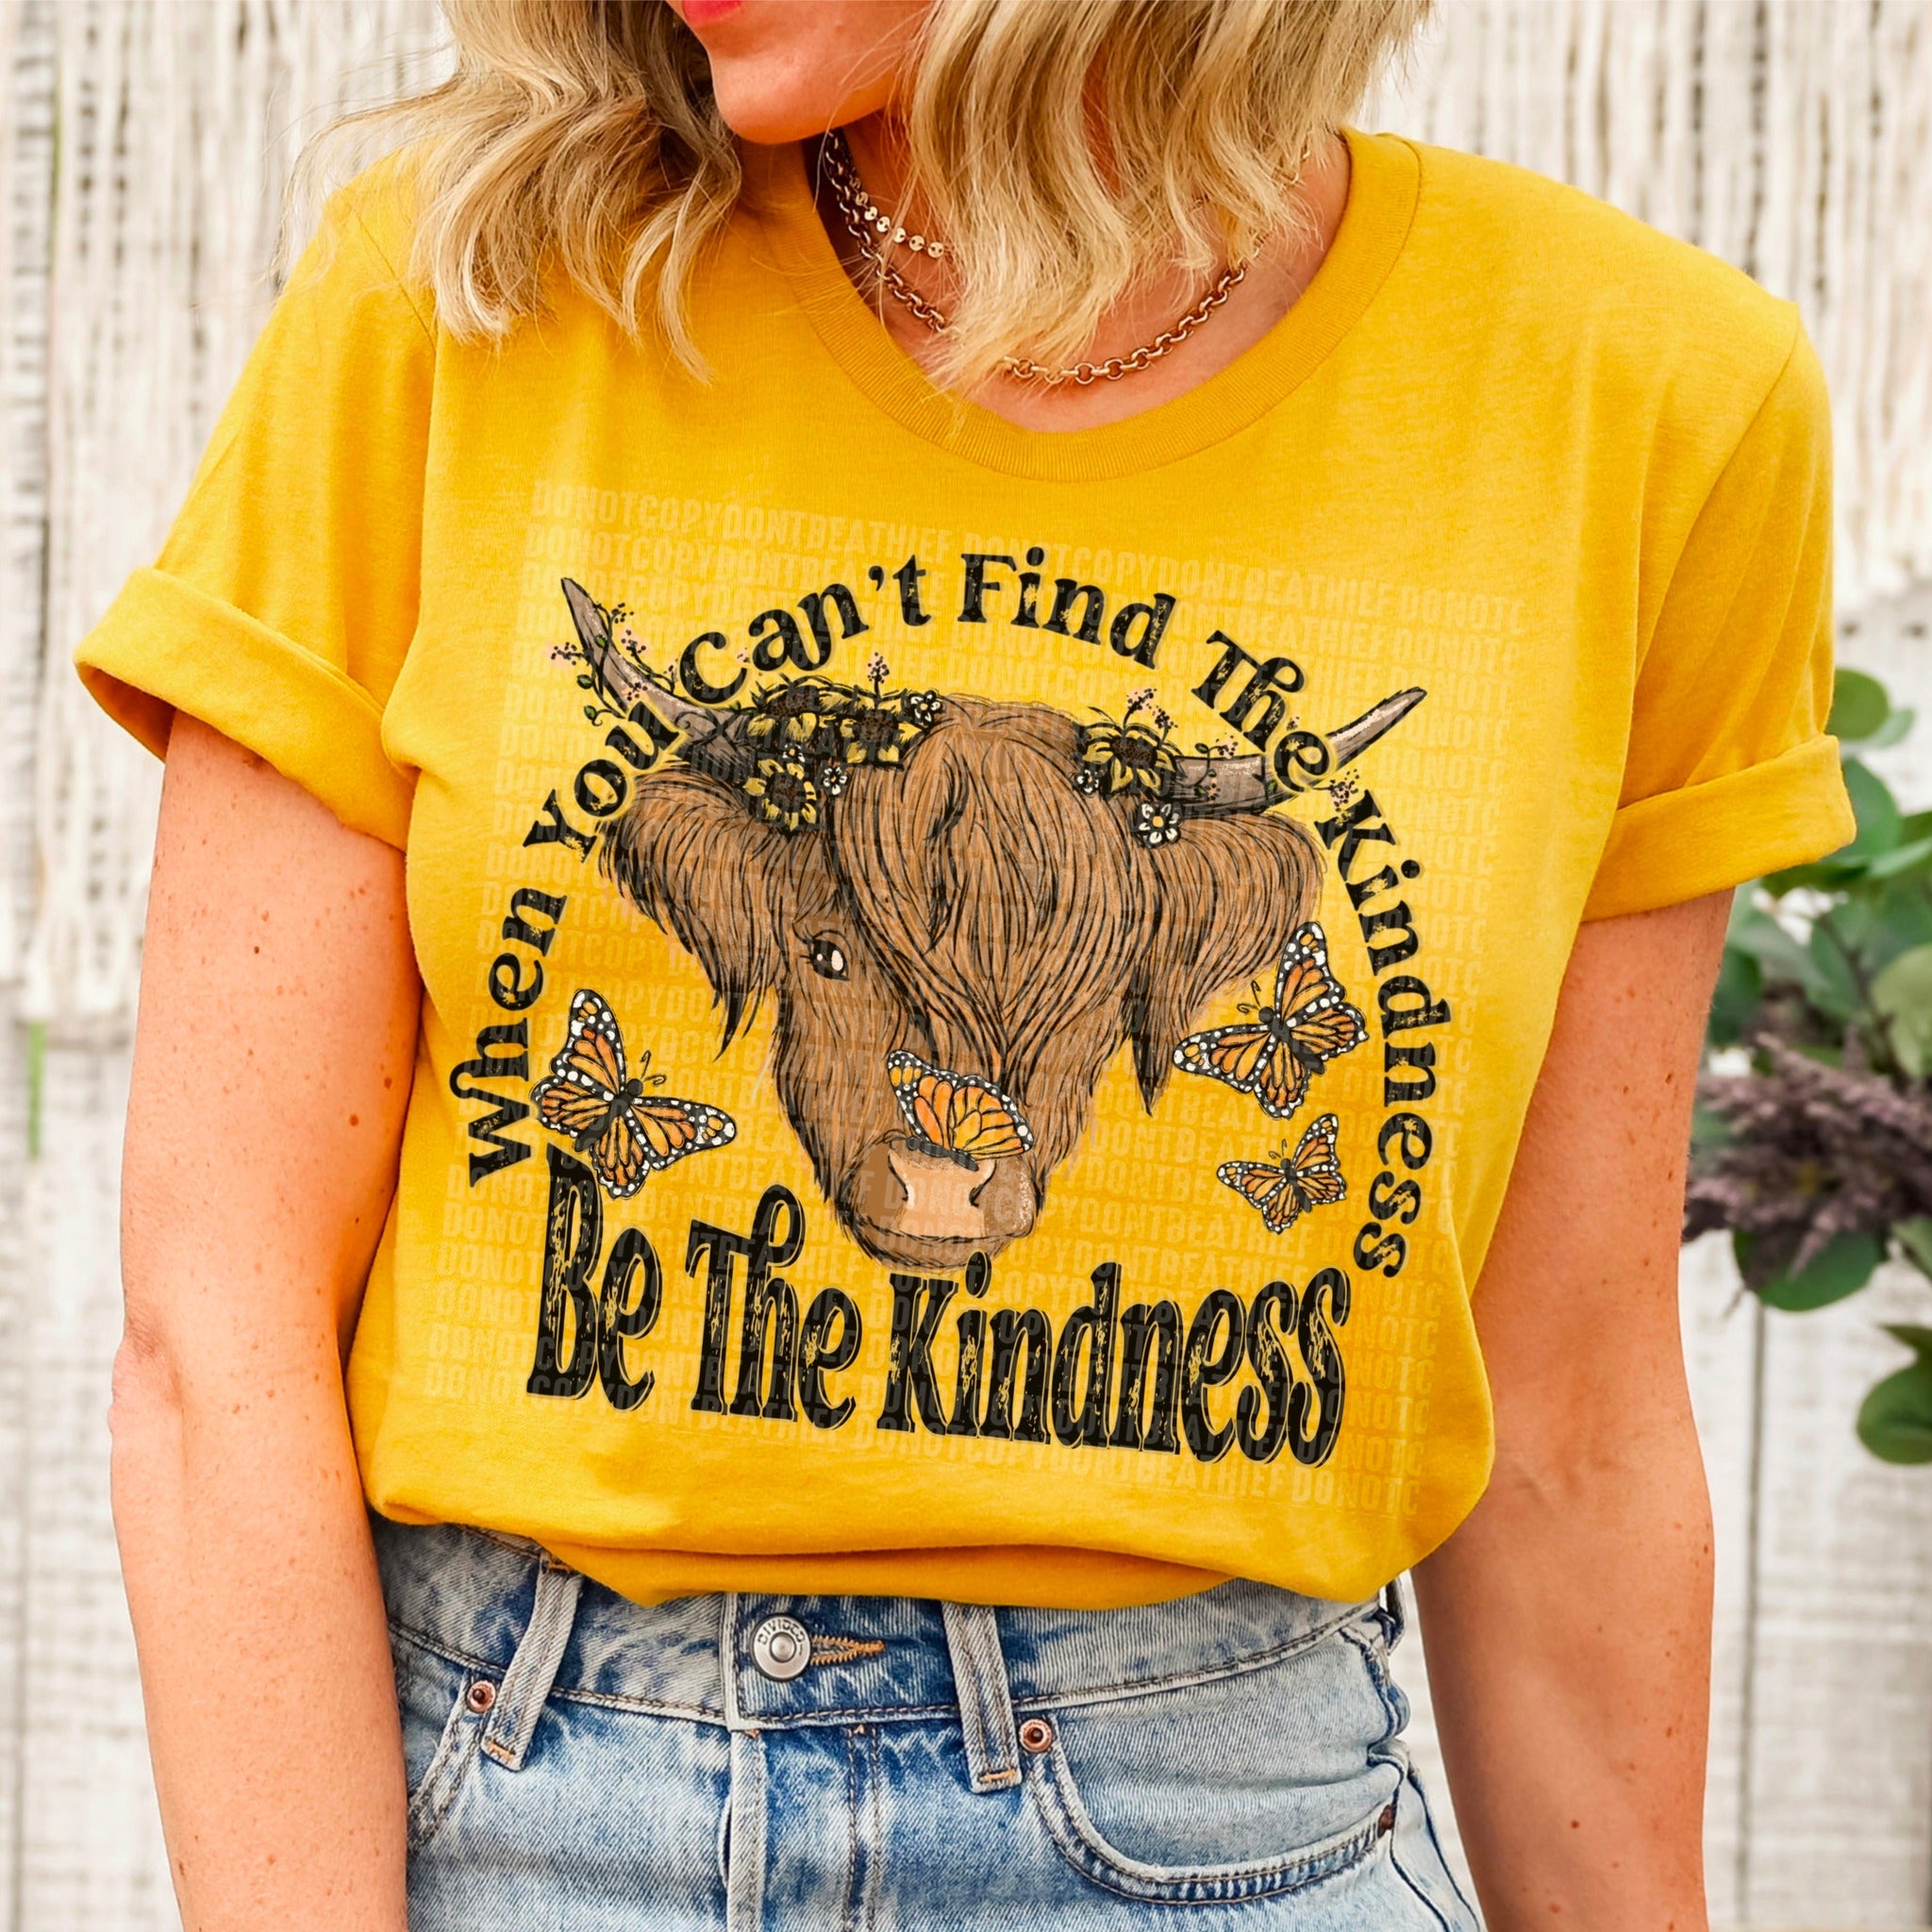 When You Can't Find The Kindness Be The Kindness - Tee